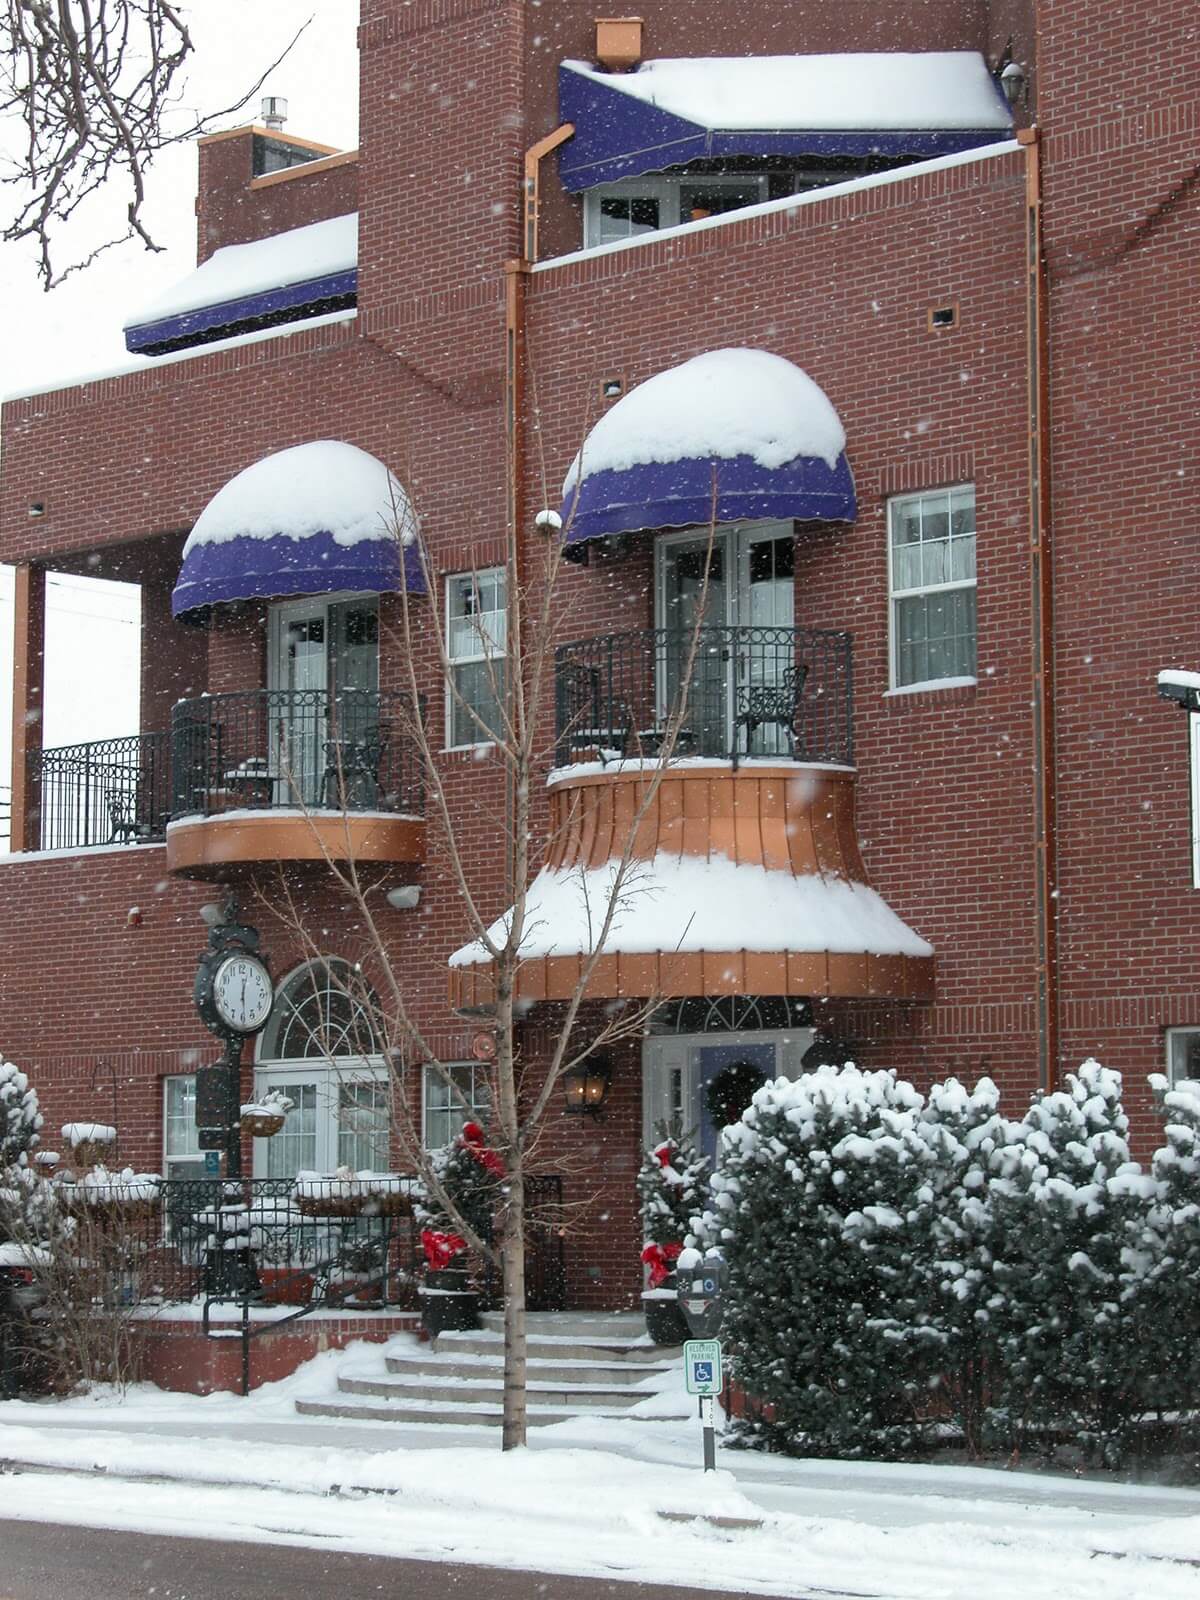 Old Town GuestHouse Snow Daytime - Bed & breakfasts & inns of Colorado Association